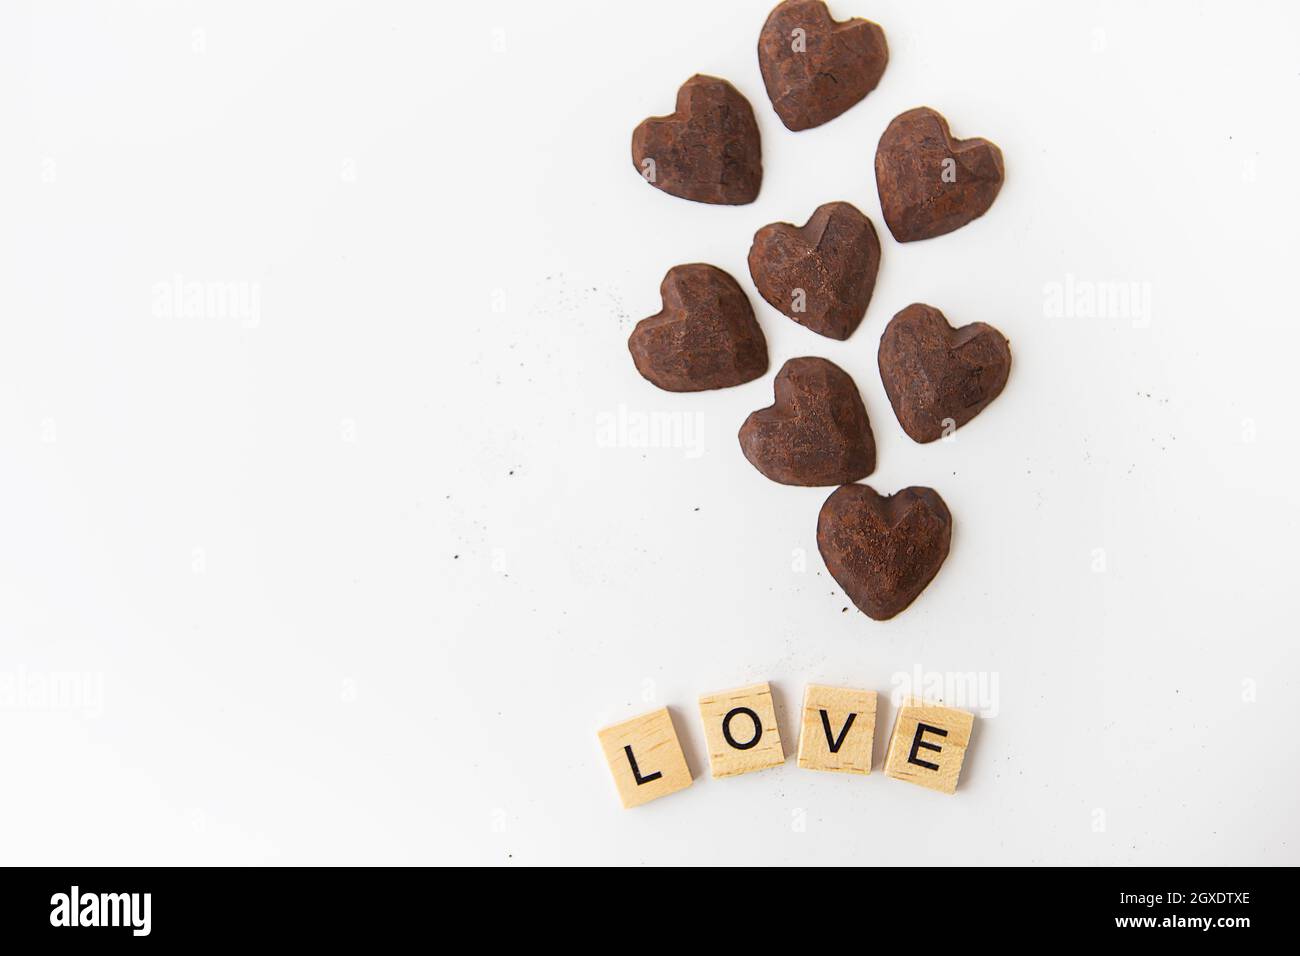 Truffle chocolate candies in the form of a heart on a white background. Inscription love made of wood letters. Place for an inscription Stock Photo